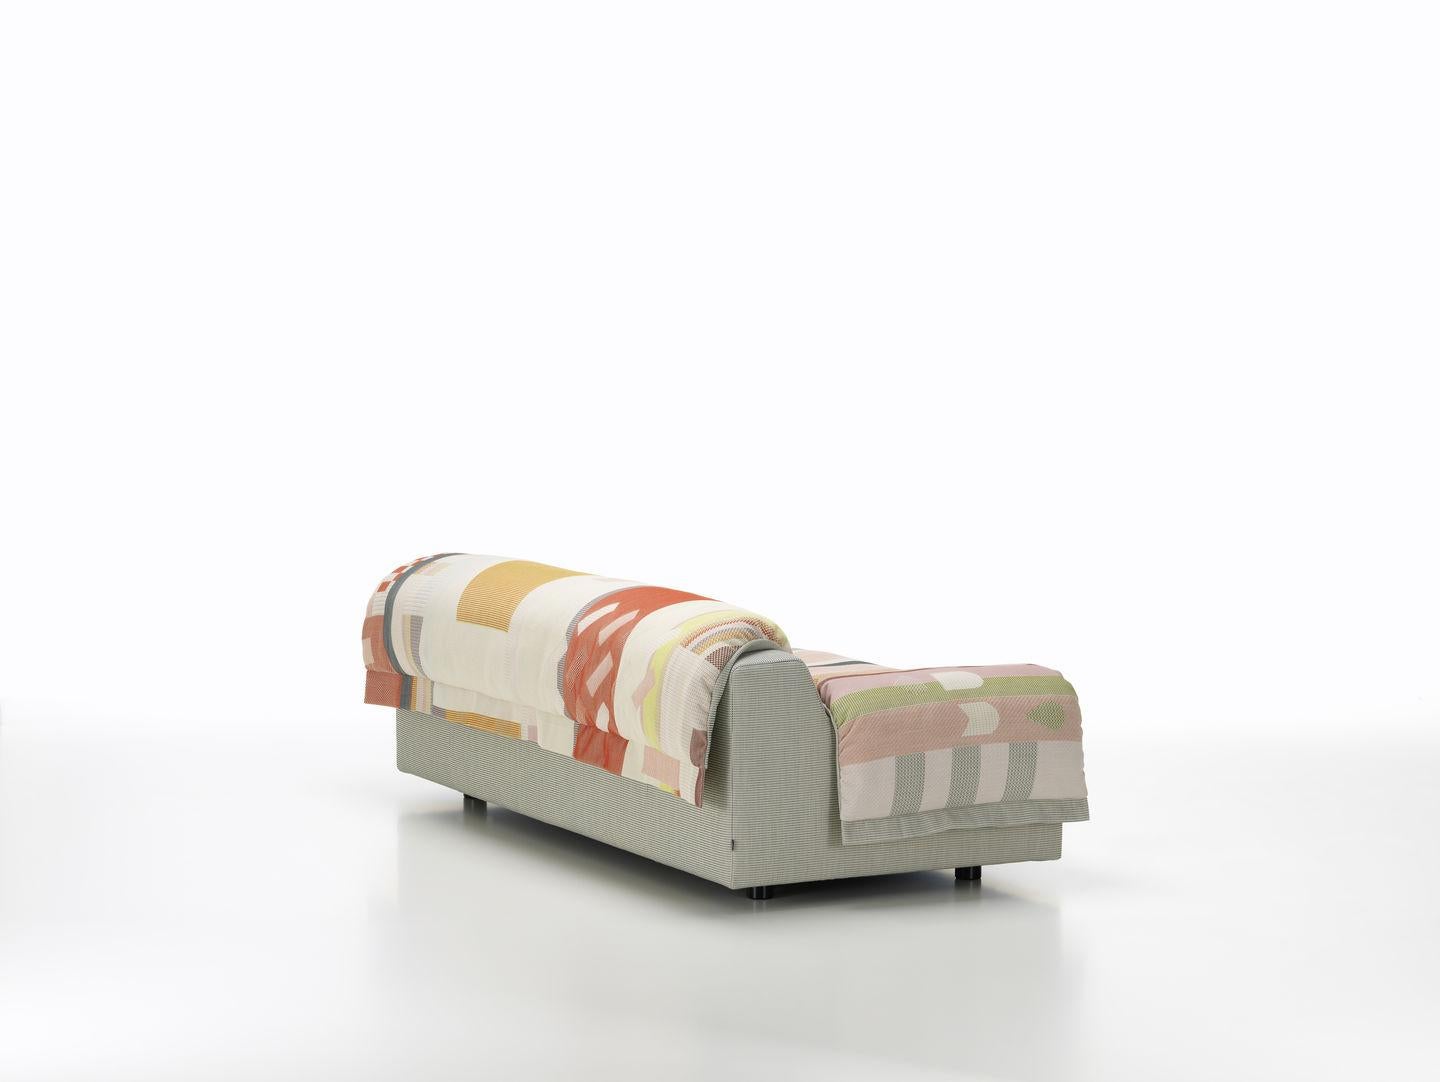 These items are currently only available in the United States.

When creating the new Vlinder Sofa, Hella Jongerius drew on her extensive knowledge of weaving techniques along with her ten years of experience as Art Director for colors and